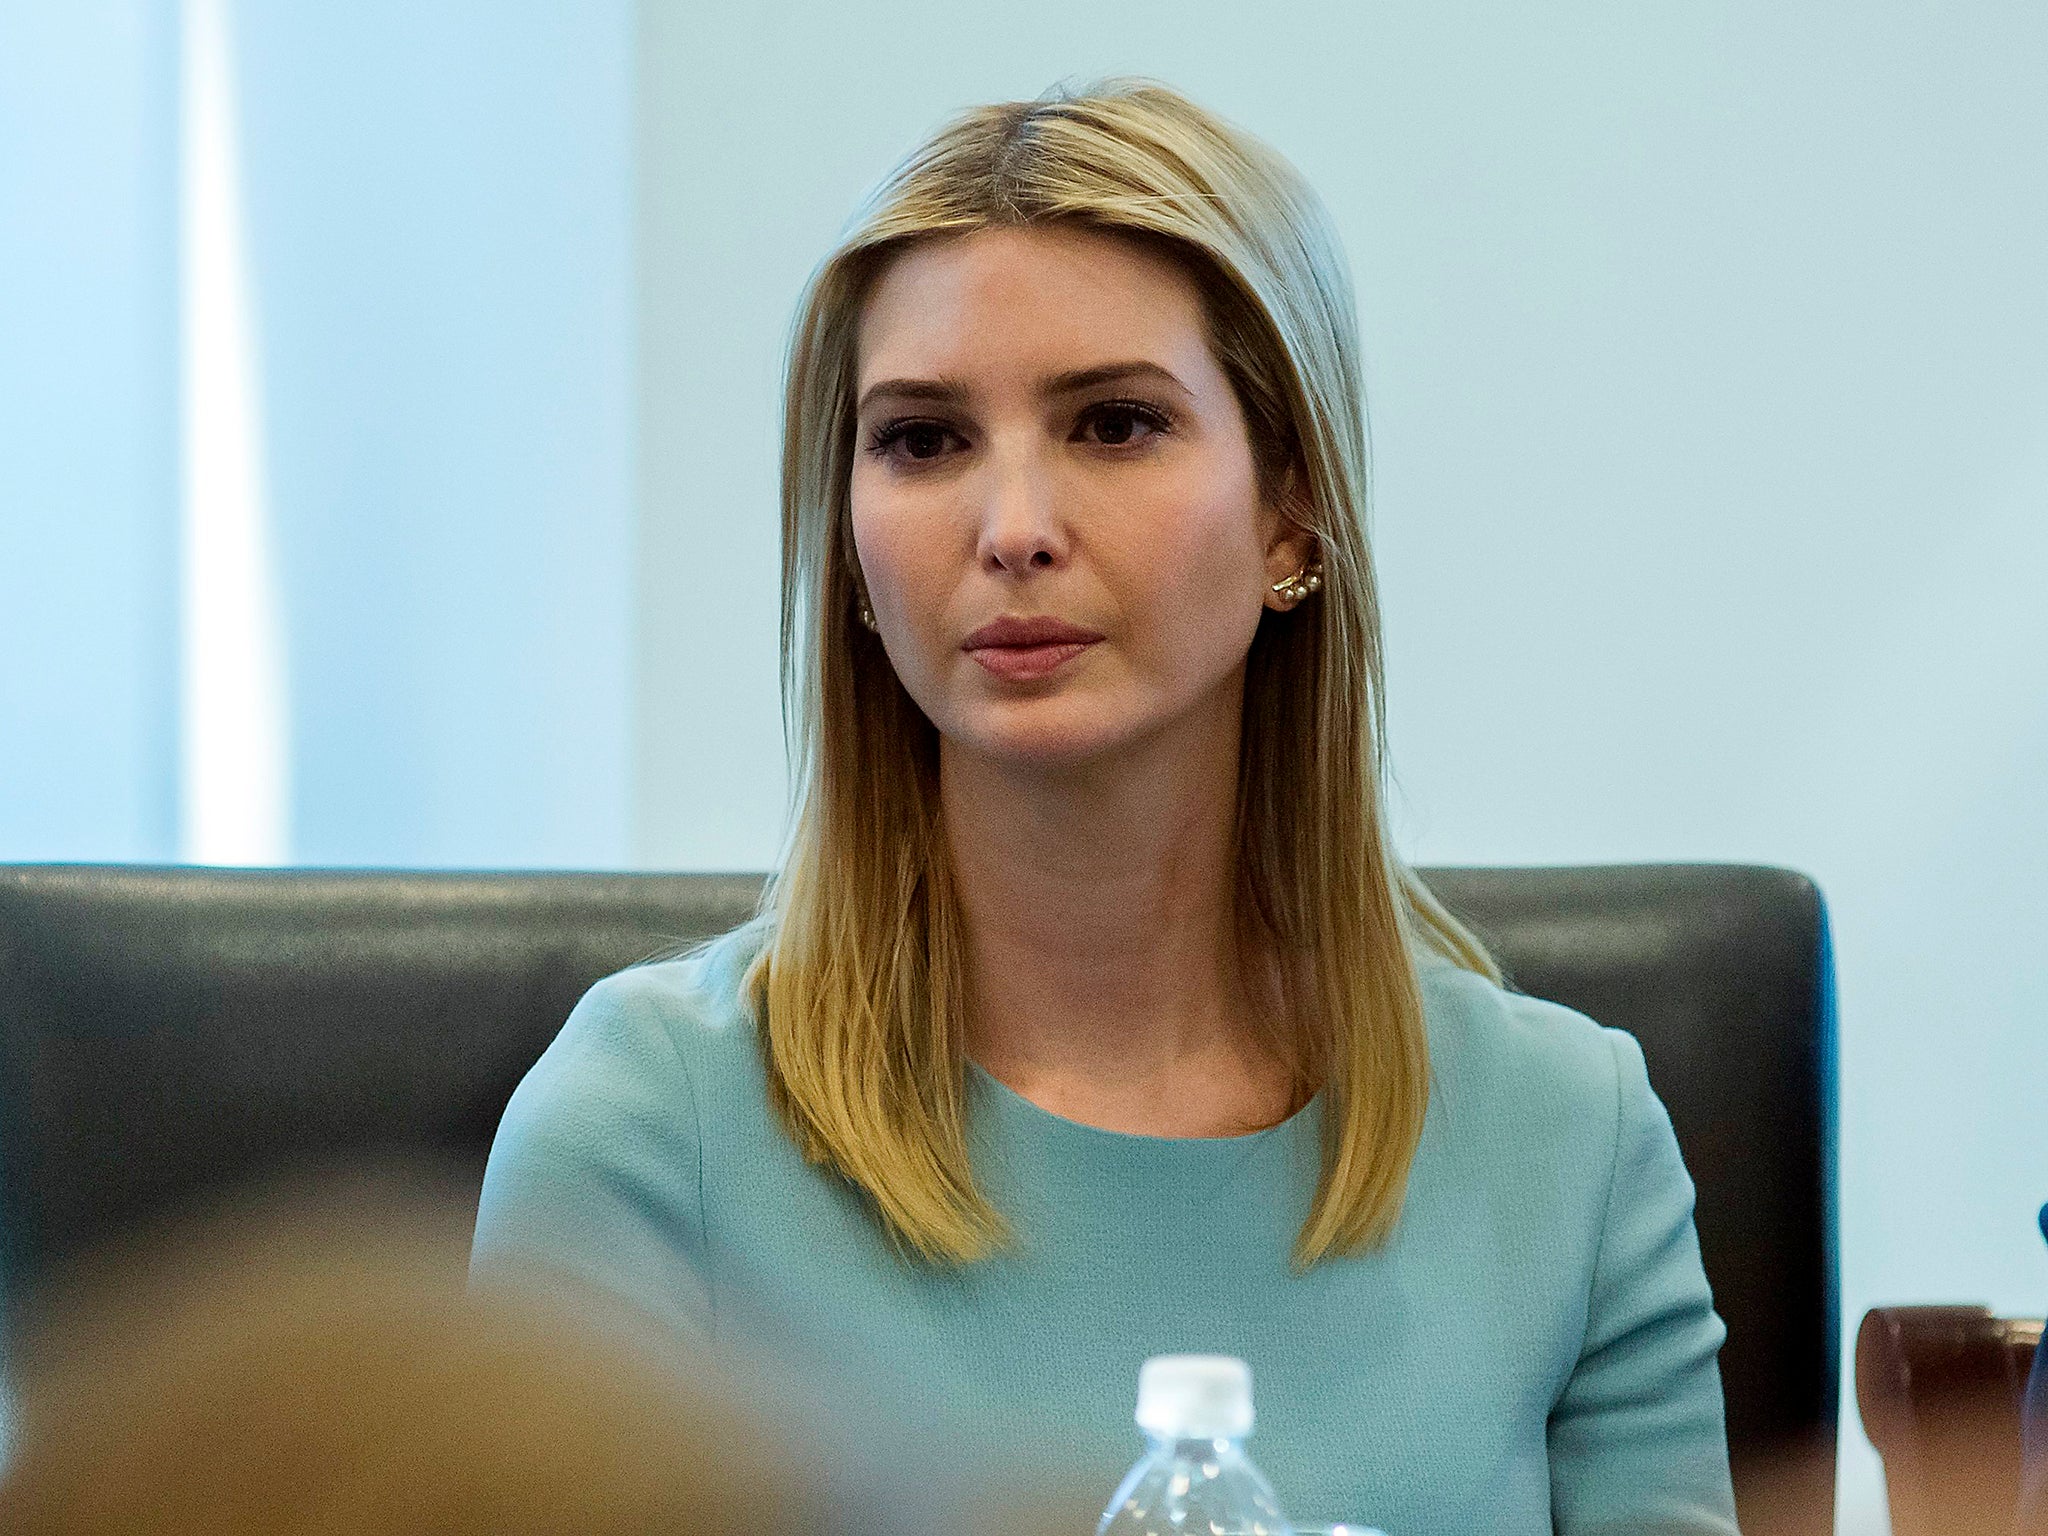 &#13;
Ivanka Trump will occupy a White House office &#13;